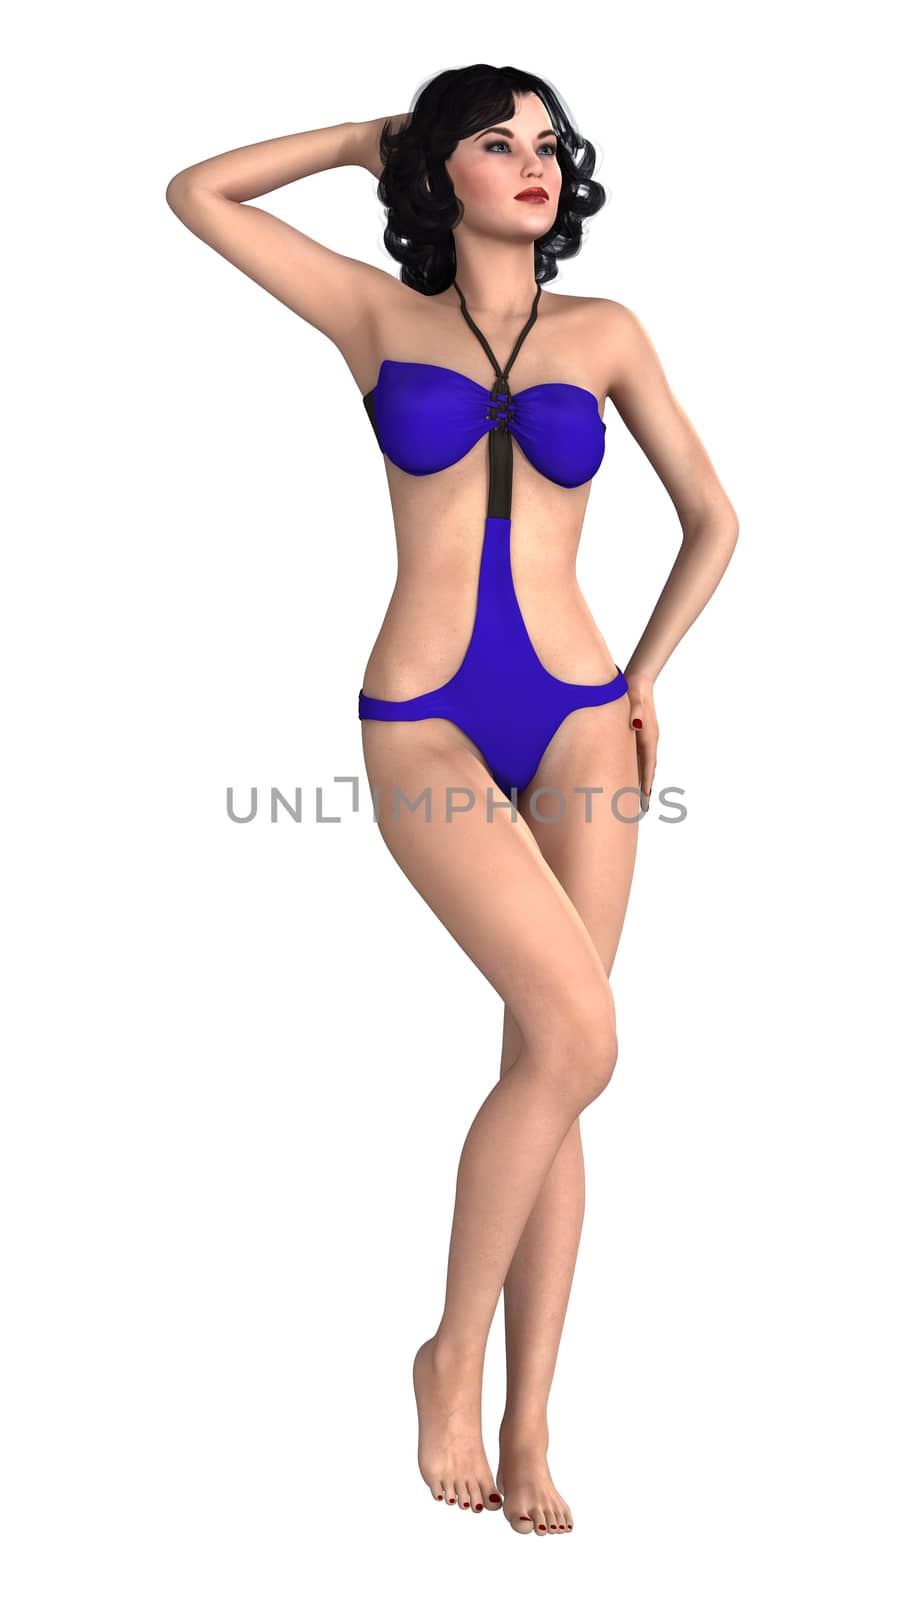 3D digital render of a beautiful pin up girl isolated on white background